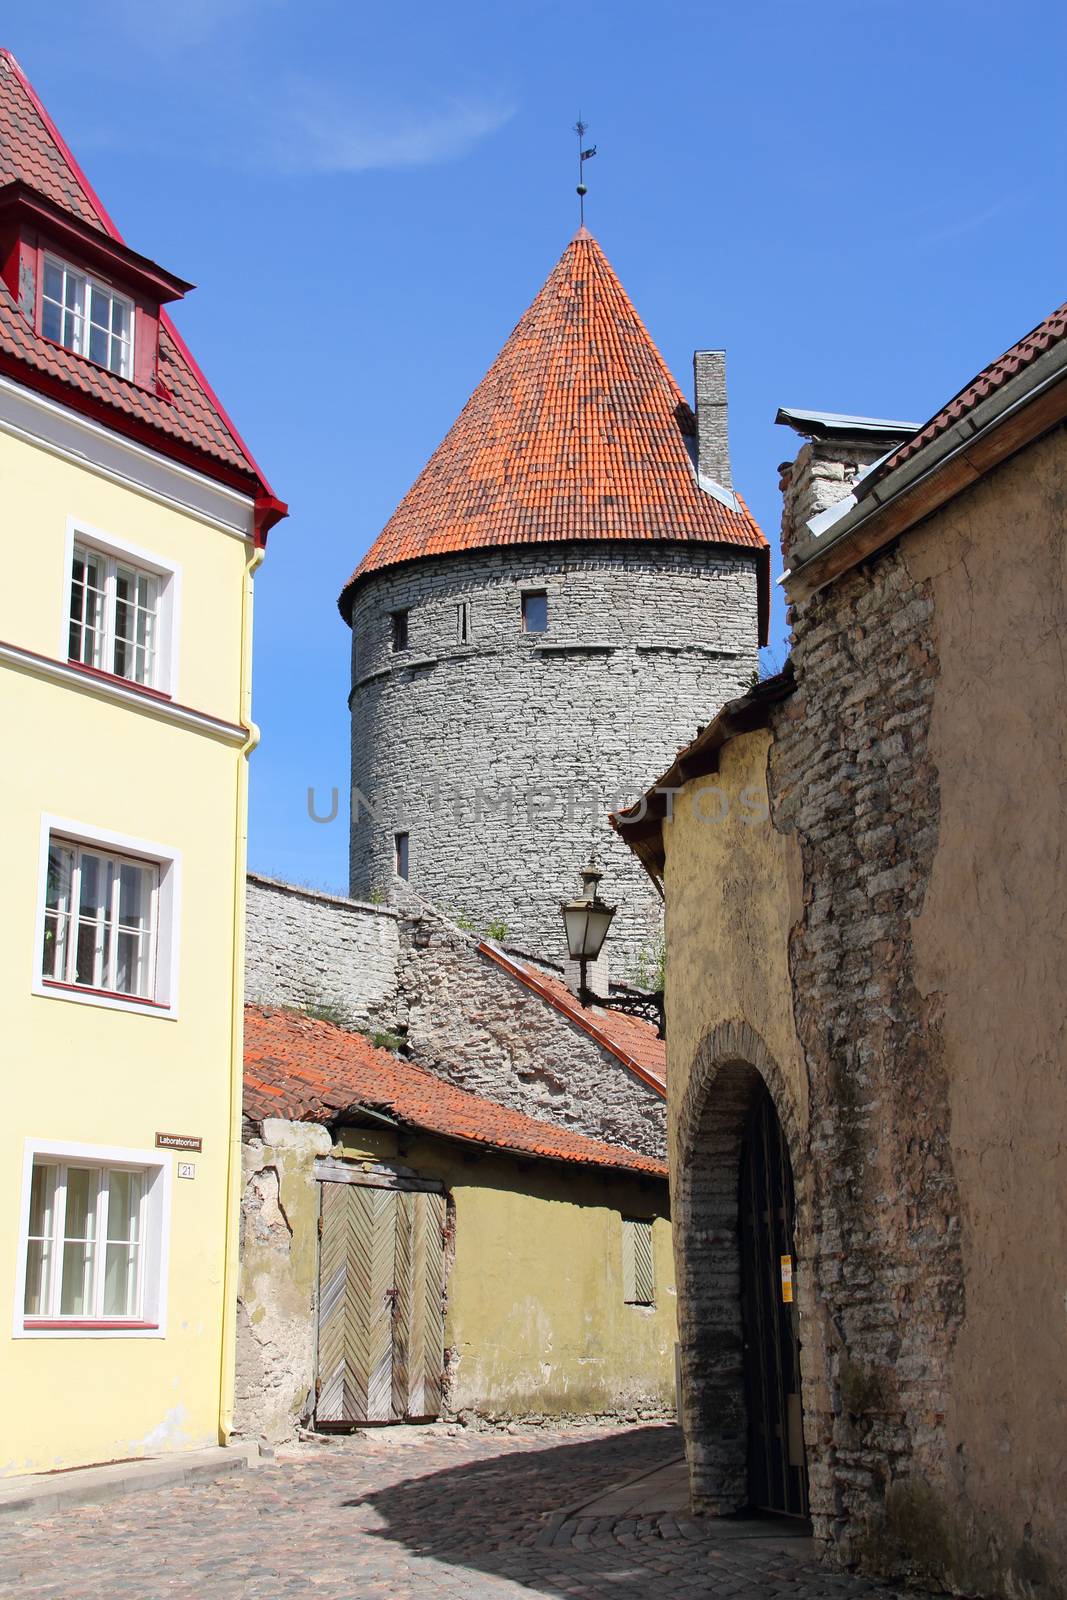 Colorful street and old castle tower in the Old Town of Tallinn, Estonia